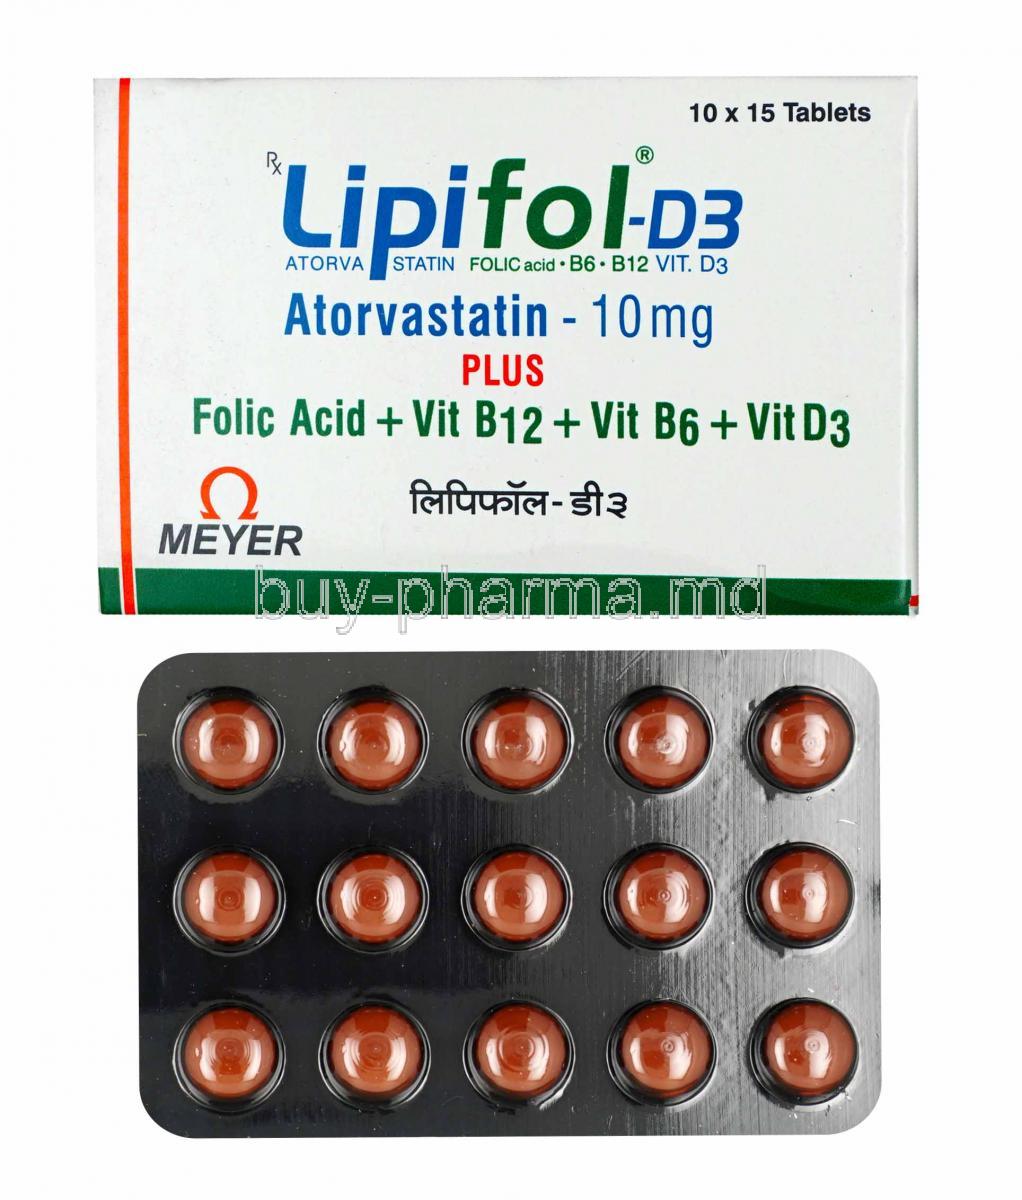 Lipifol-D3 box and tablets